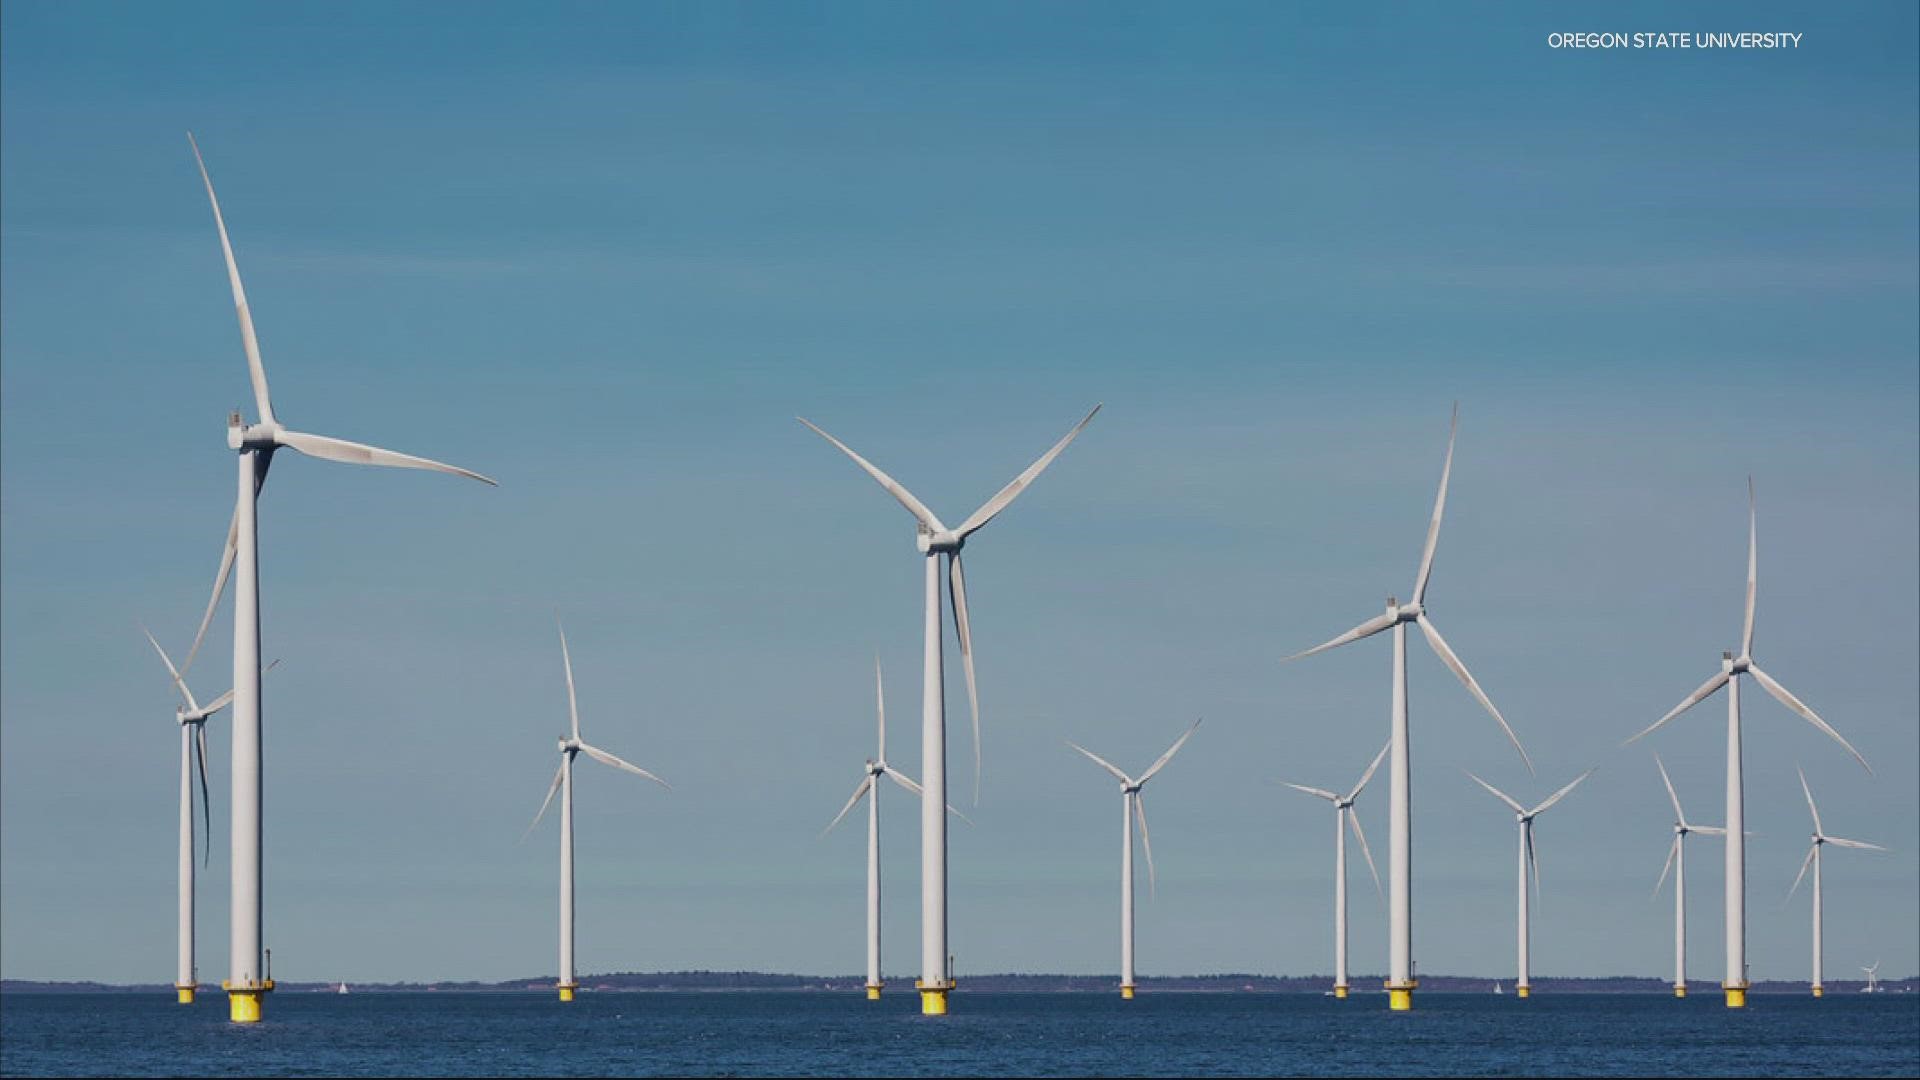 The Biden administration is pushing for more wind power by building offshore turbines. Here's a look at the benefits and potential impacts.